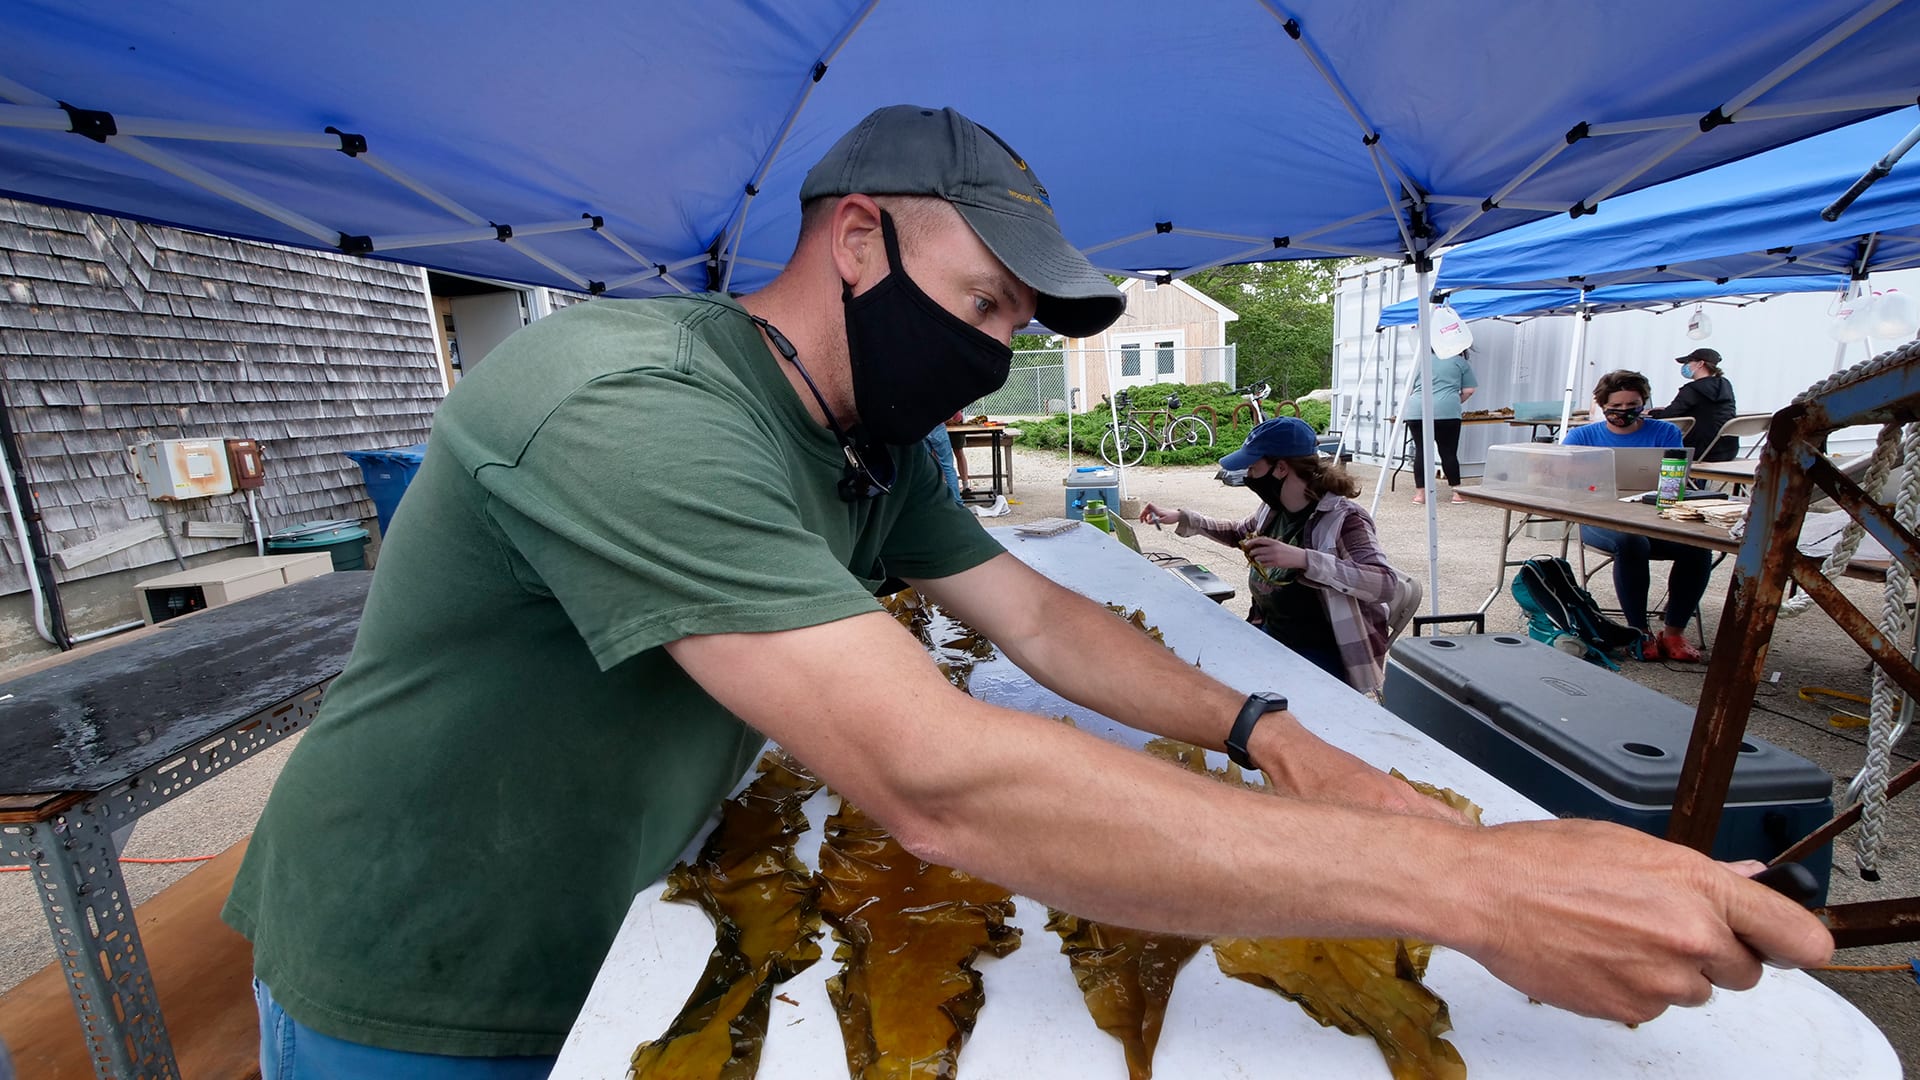 Justin Ossolinski (Senior Research Assistant in Marine Chemistry and Geochemistry), sets up kelp blades for taking measurements while Heather Marin (Senior Administrative Professional in AOPE) prepares to record data.
(Photo by Ken Kostel, © WHOI)